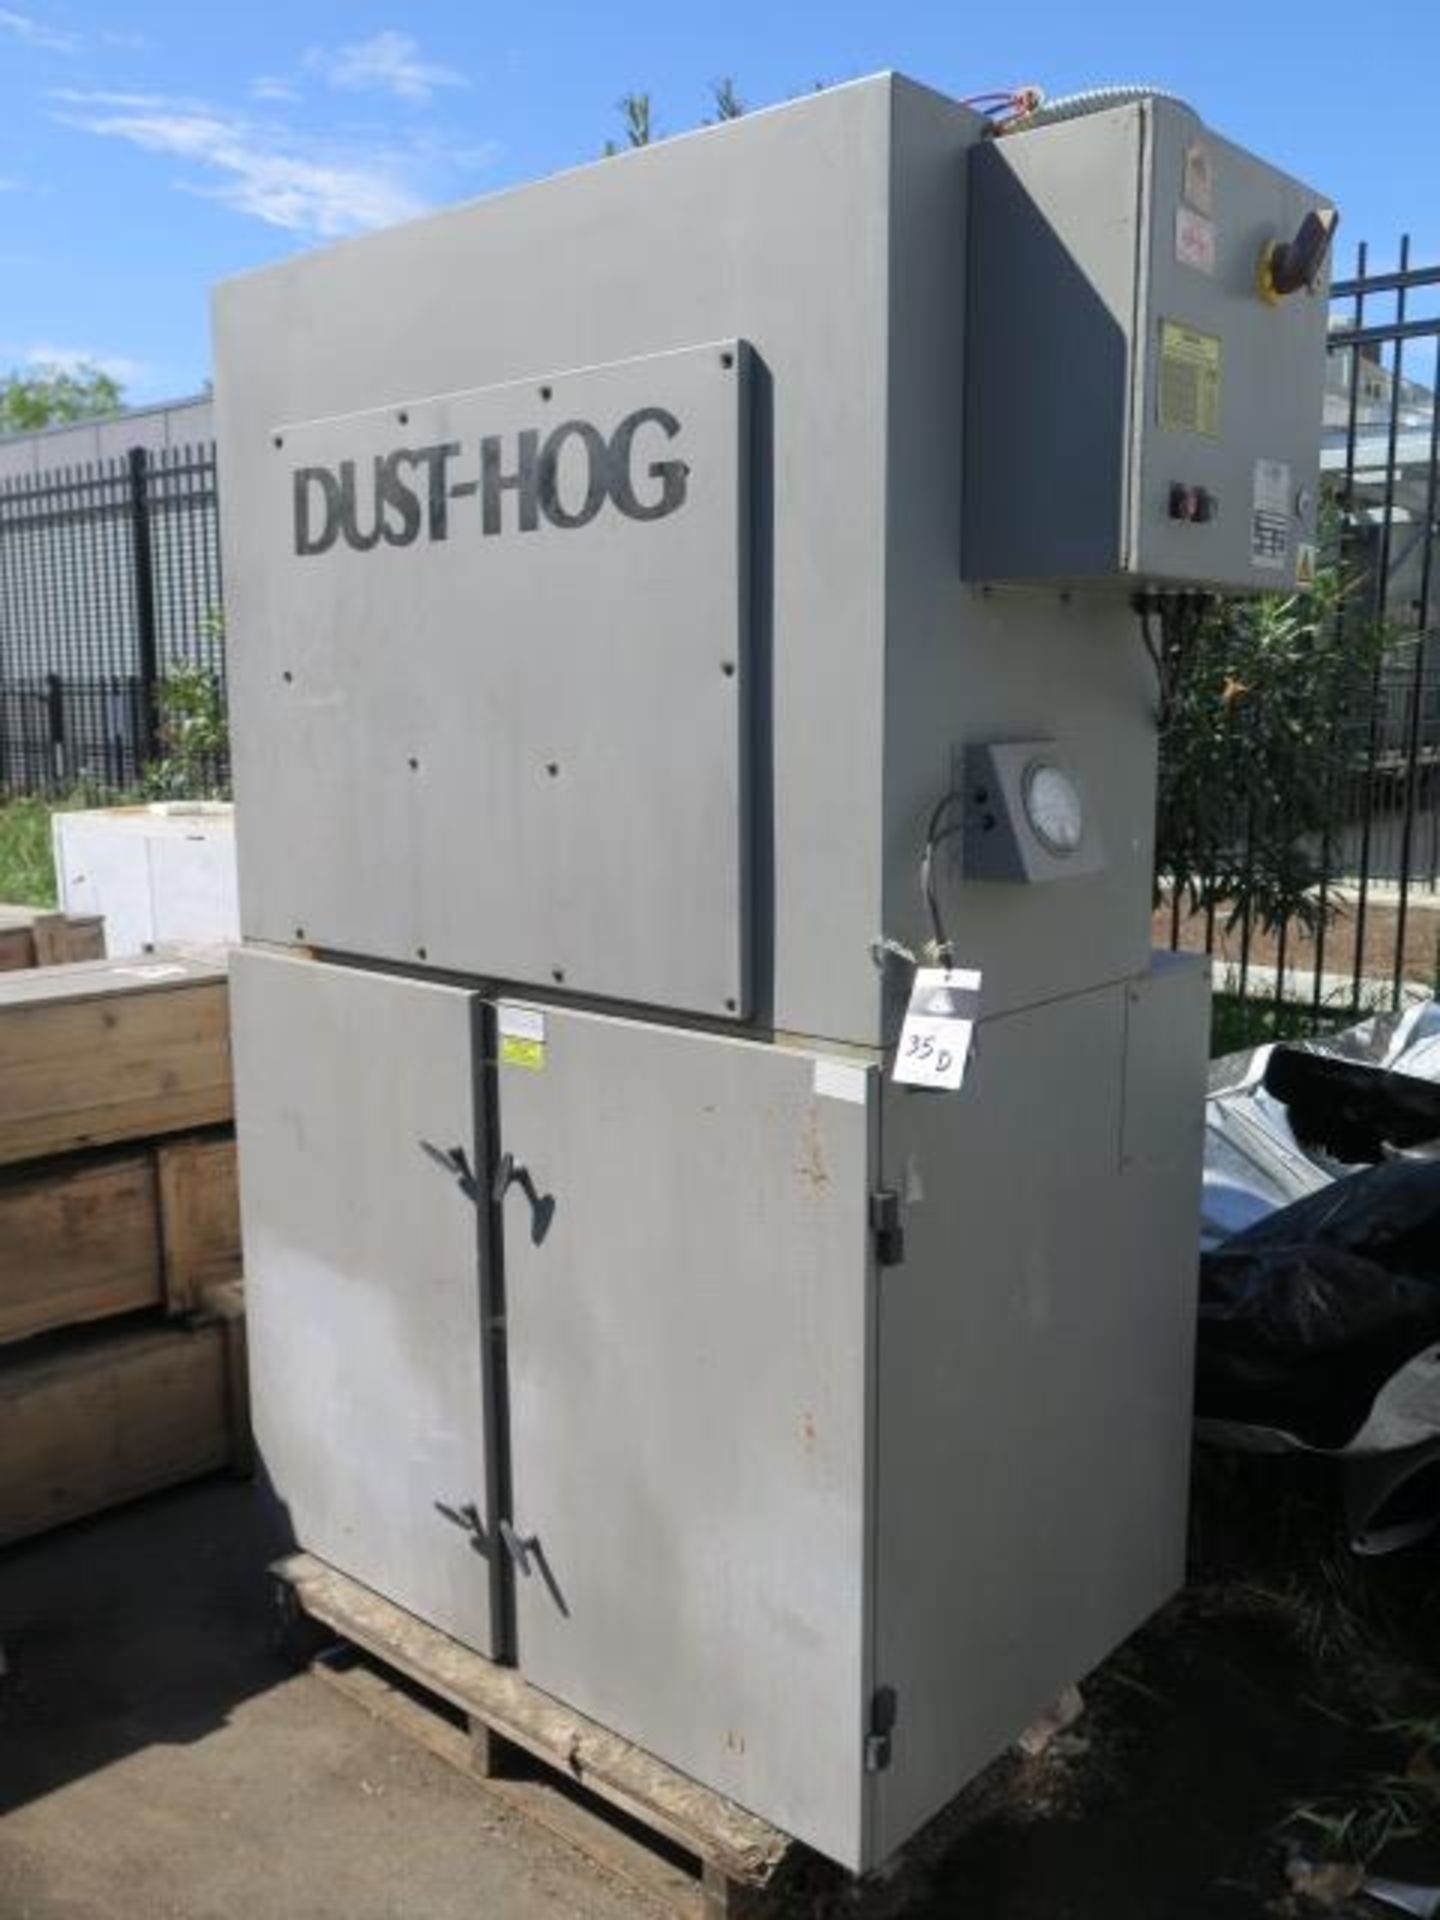 United Air Specialists, Dust-Hog mdl. SC3400 Dust Collector s/n 60047702 (SOLD AS-IS - NO WARRANTY)